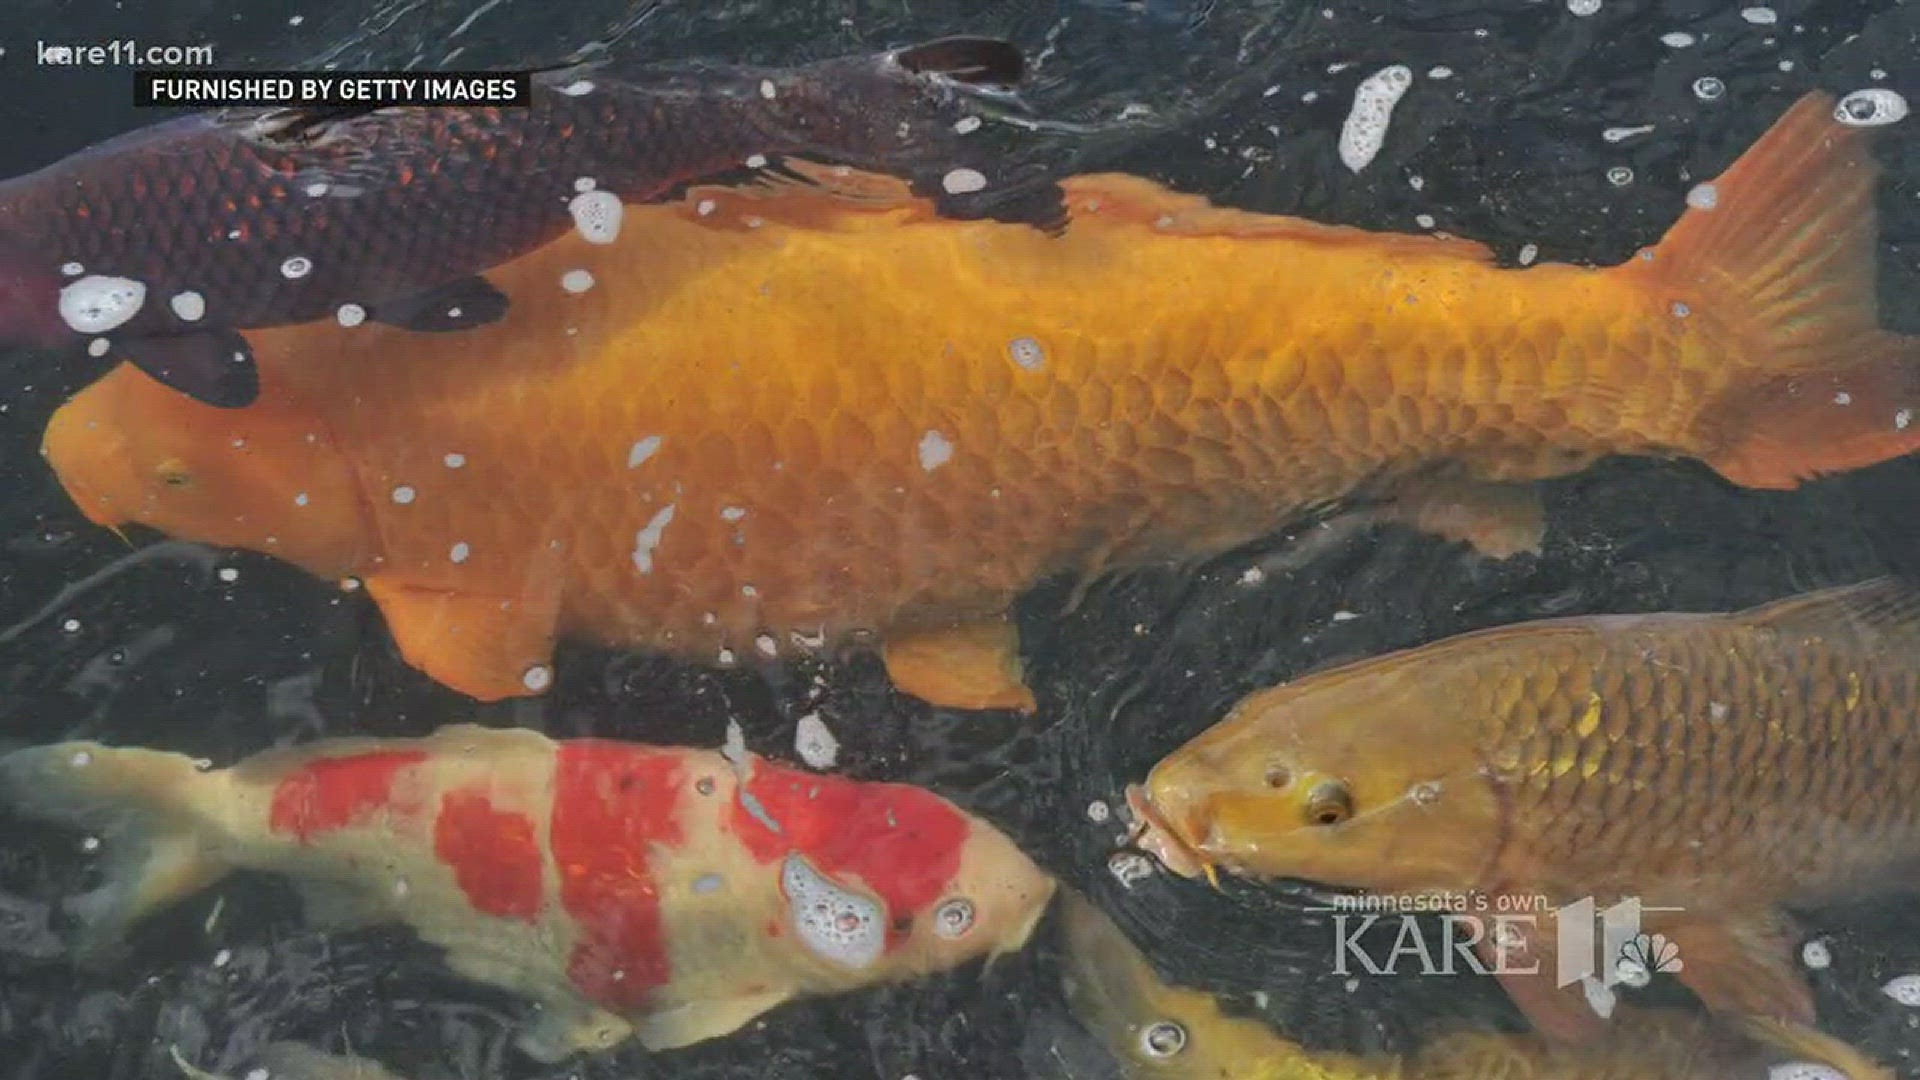 The common carp is now more known as a source of destruction to lake vegetation, which is why researchers have spent years looking for ways to control them. Now, a herpes virus found in ornamental Koi fish could soon help control the common carp. http://k